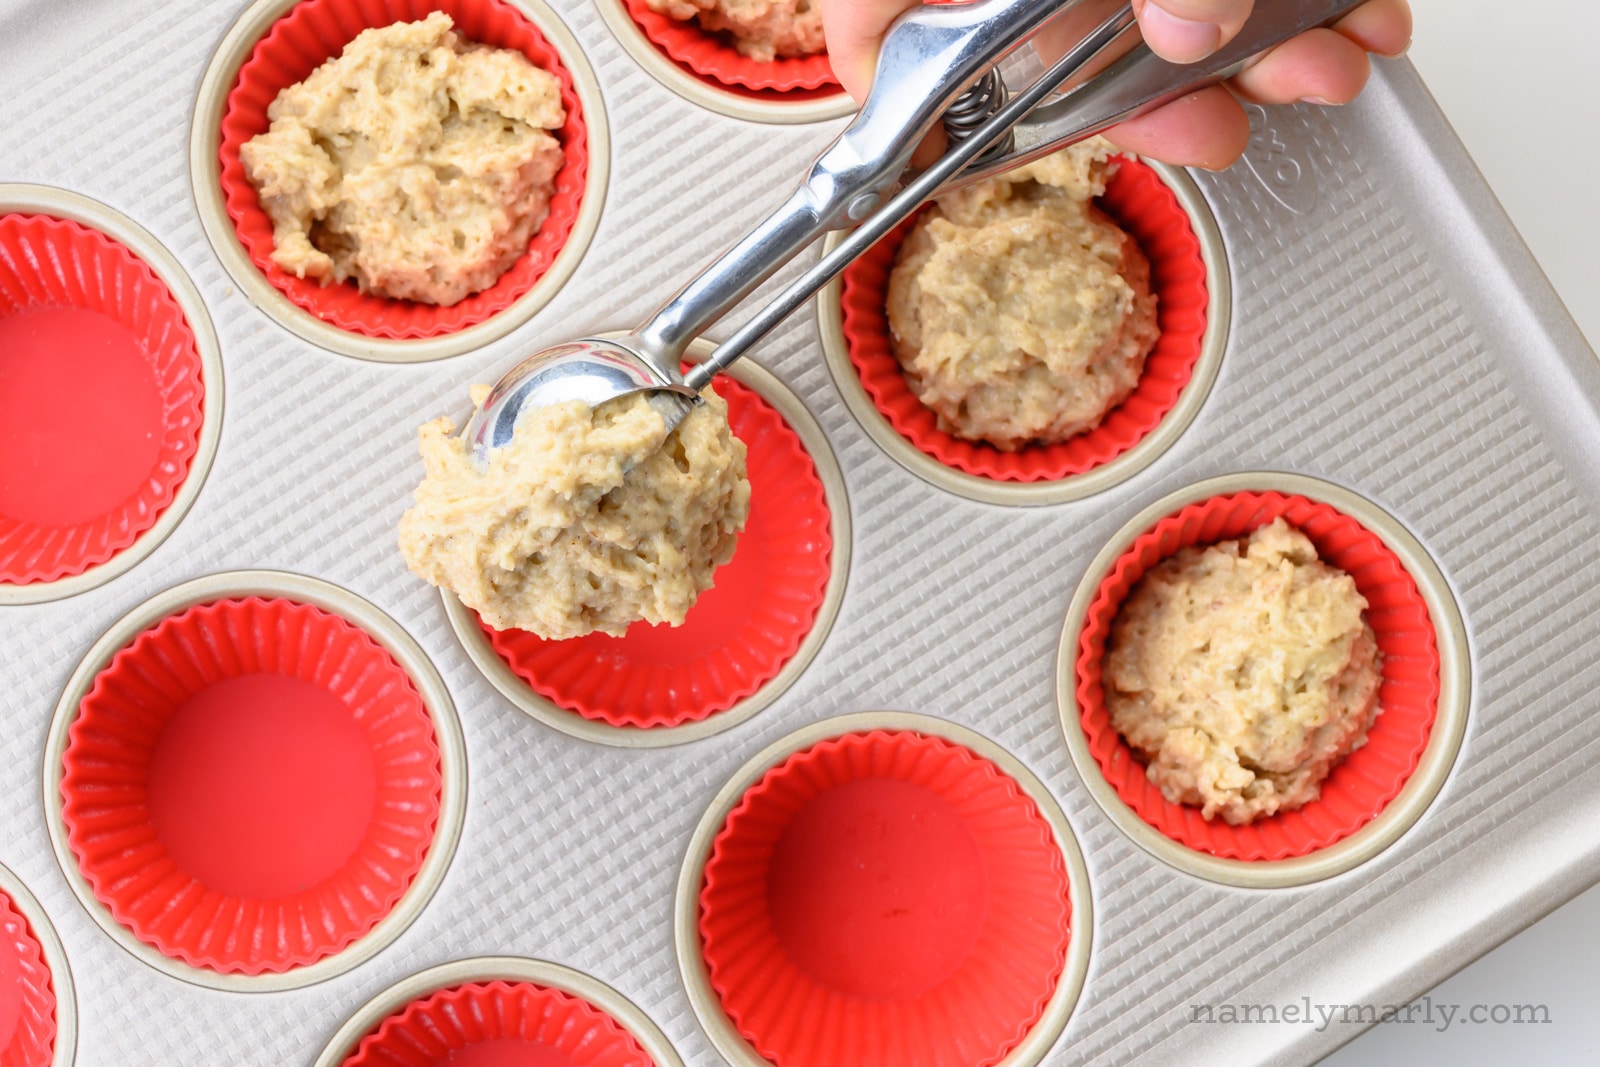 A hand holds a scoop, dropping batter into muffin compartments in a muffin pan.